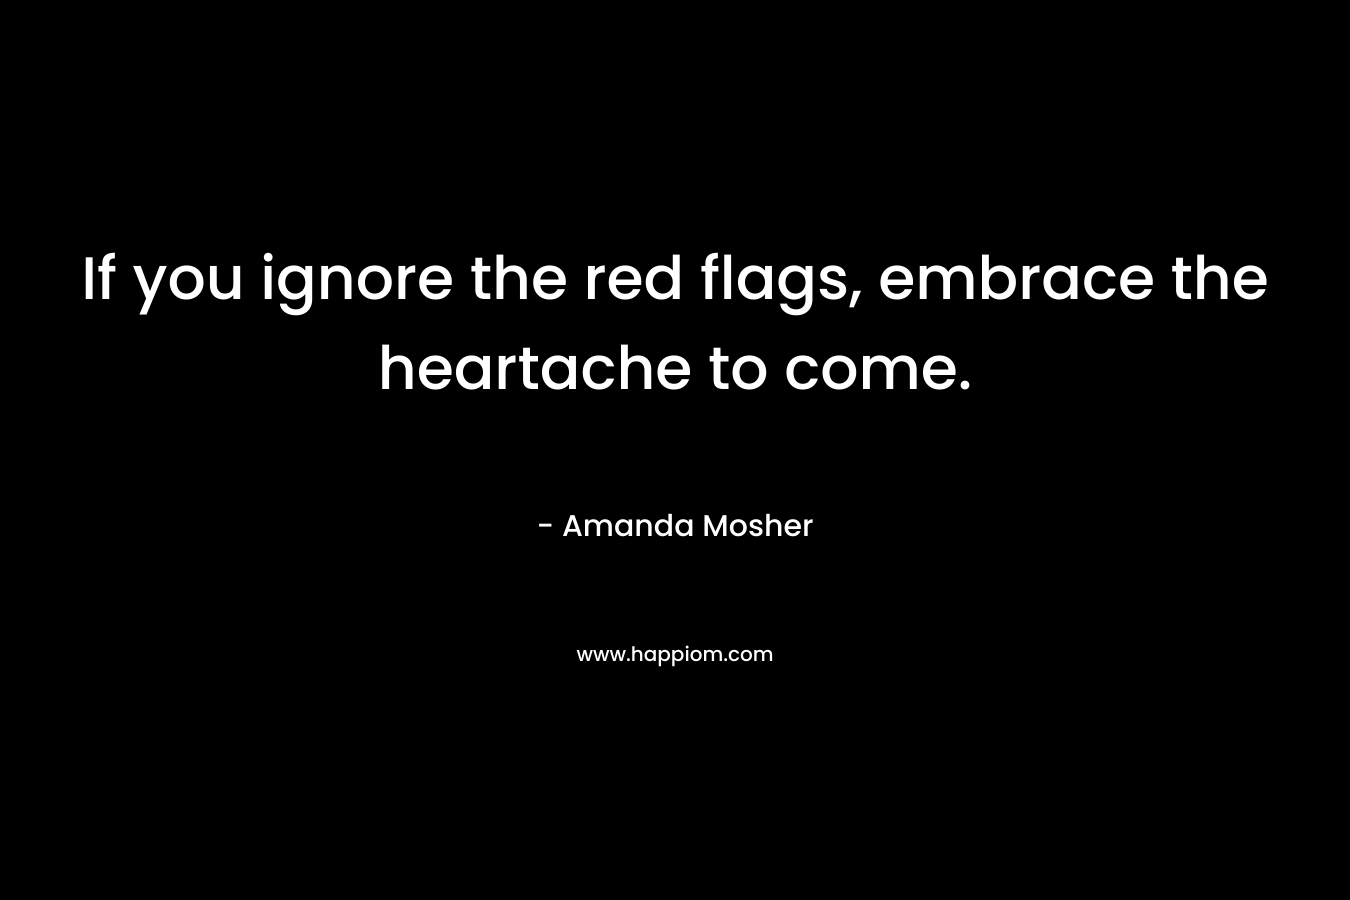 If you ignore the red flags, embrace the heartache to come. – Amanda Mosher